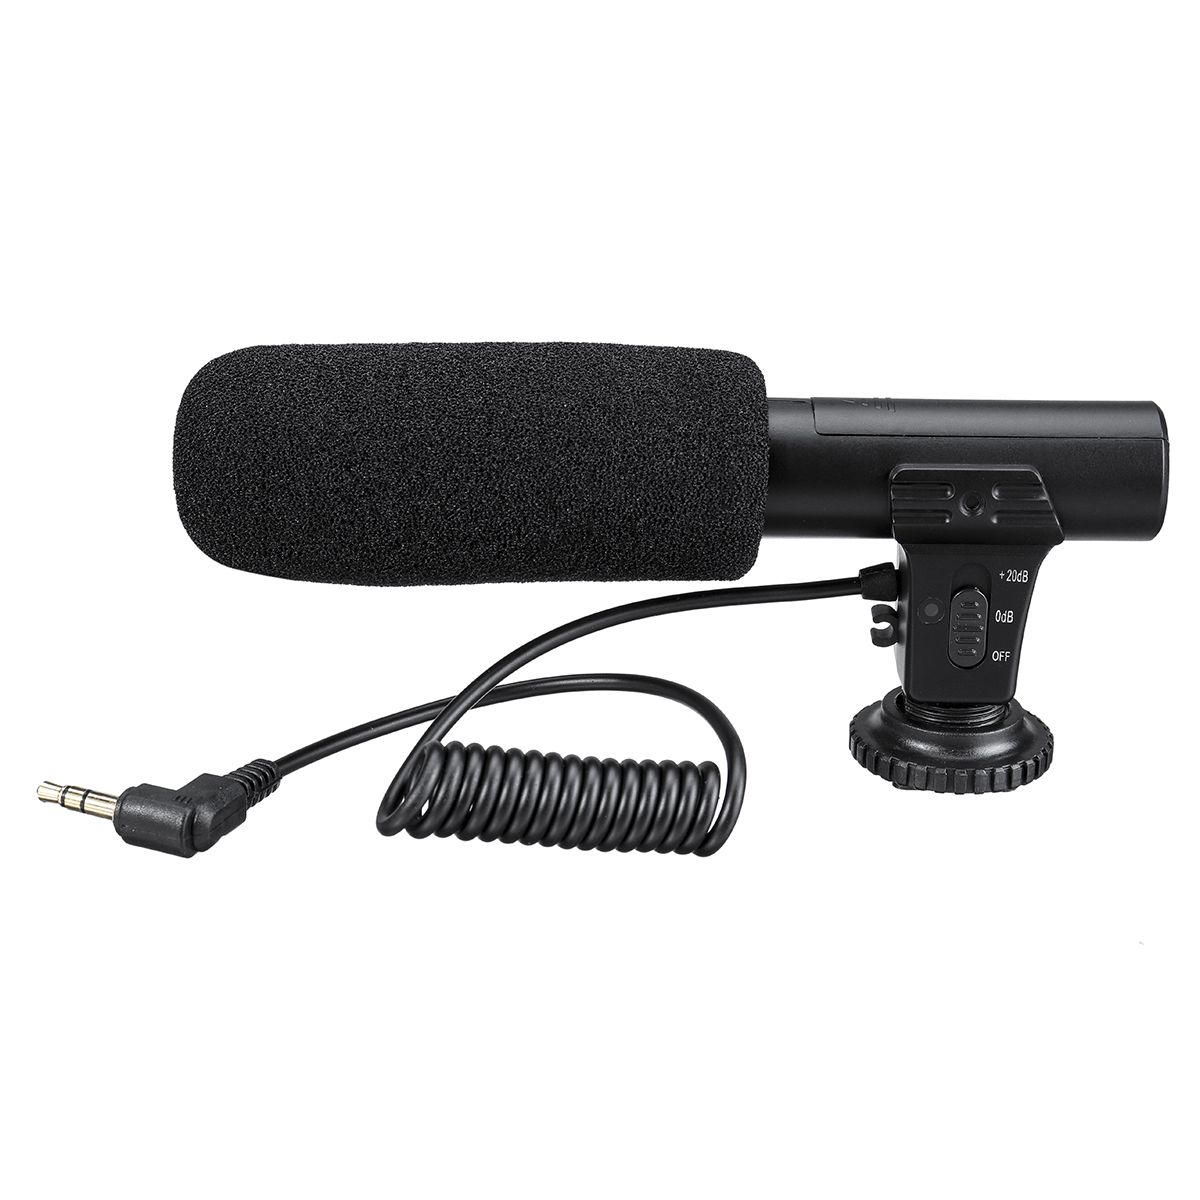 35mm-External-Stereo-Microphone-MIC-for-Canon-DSLR-Camera-DV-Camcorder-1653411